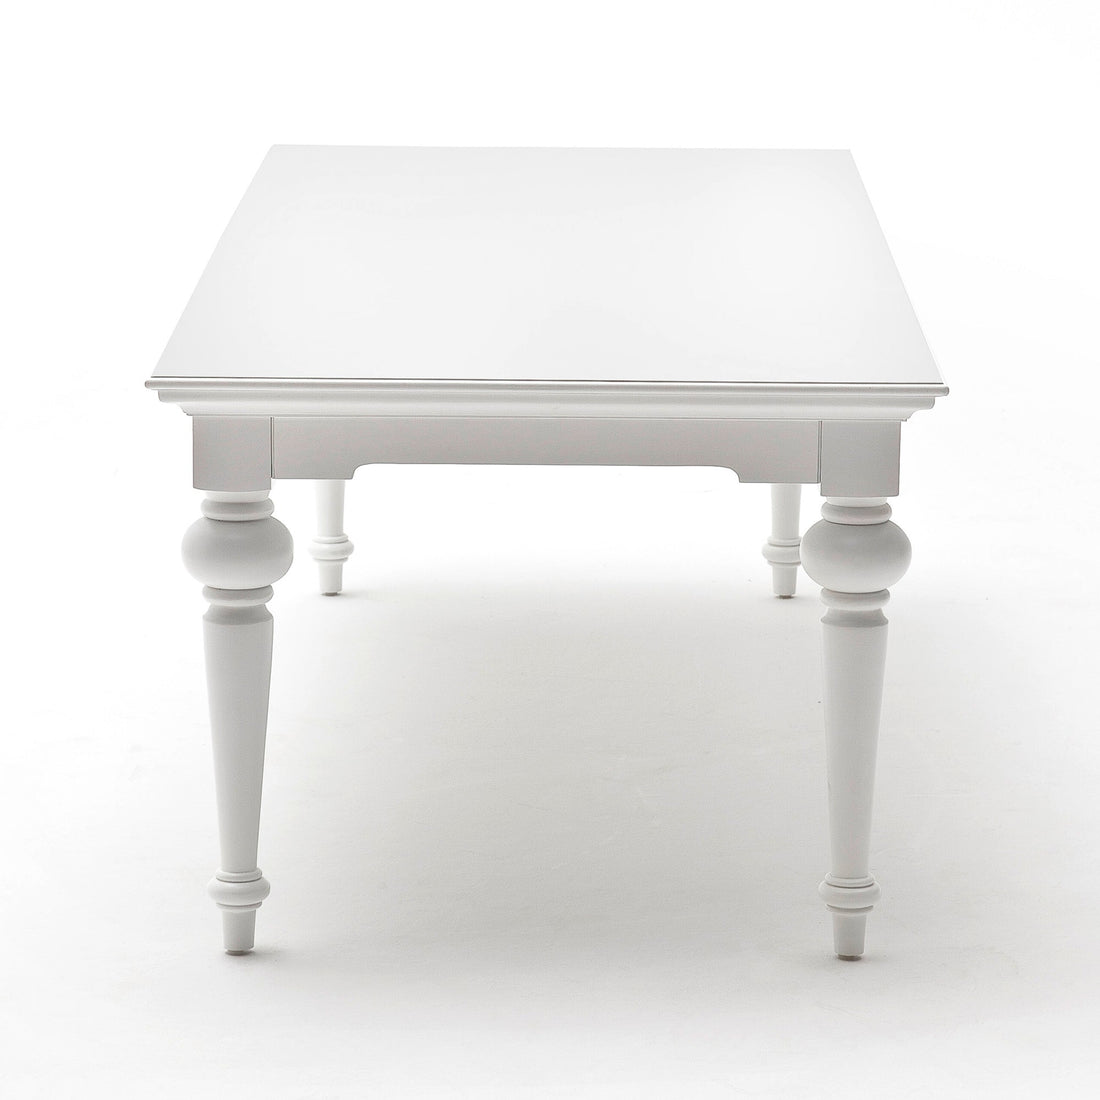 Provence Dining Tabell 240 cm